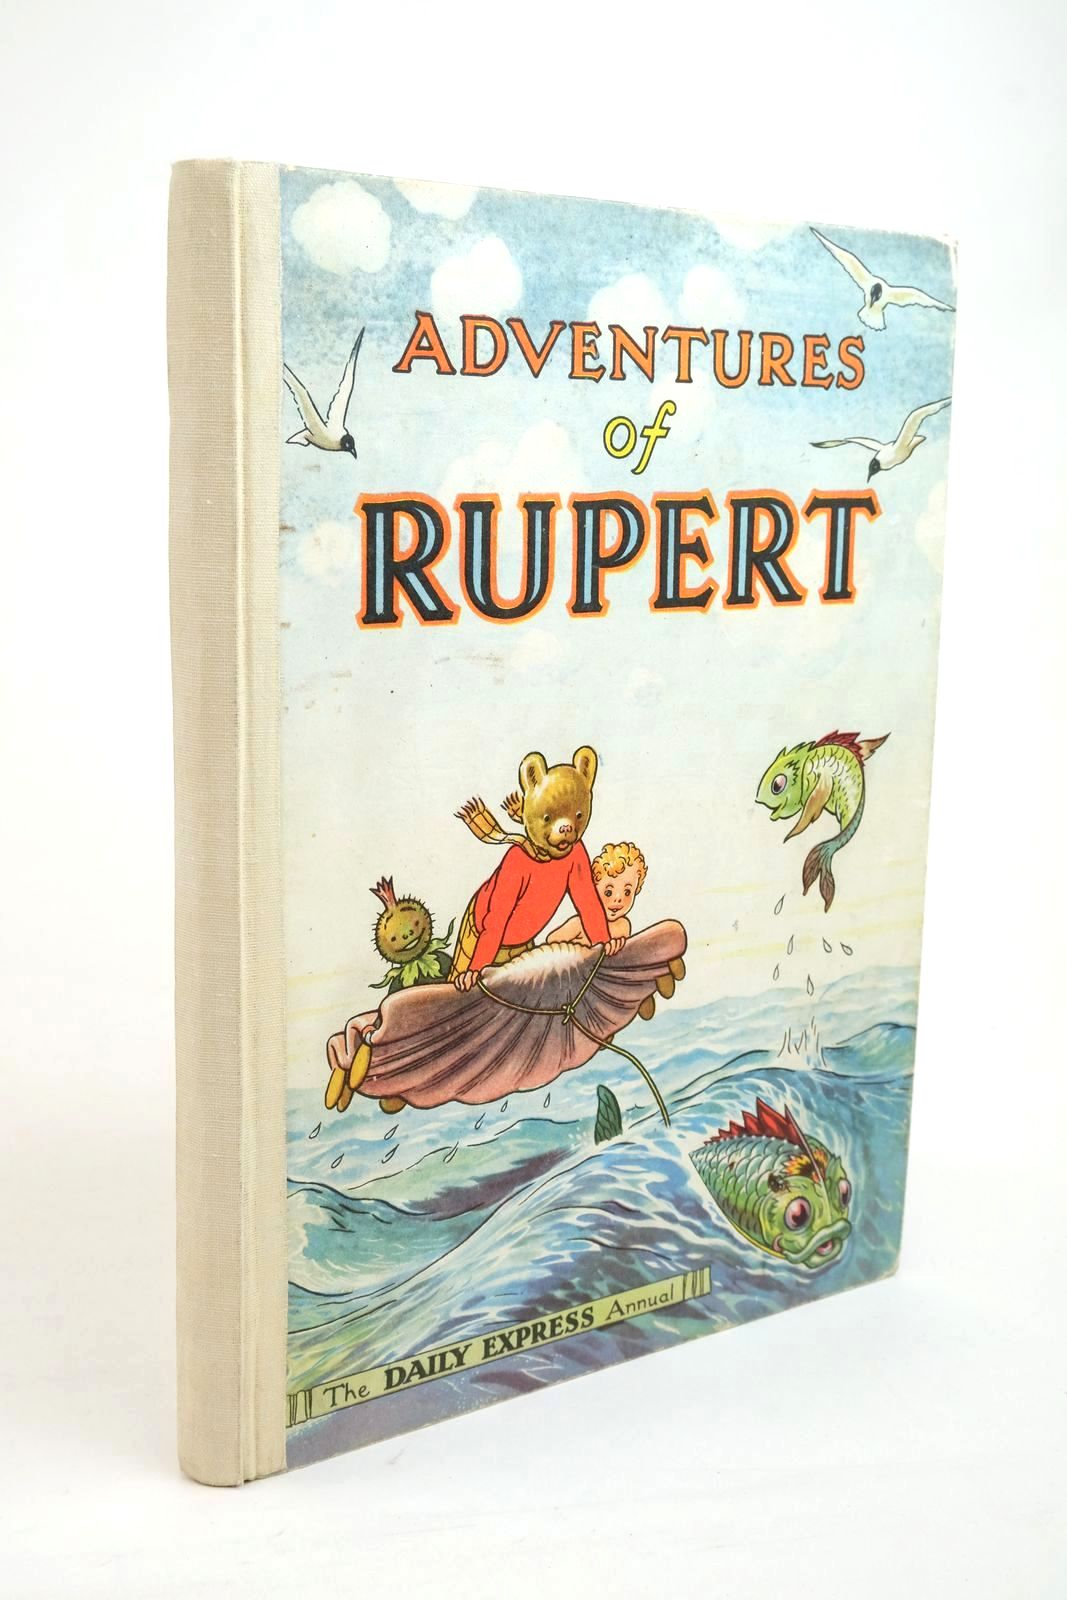 Photo of RUPERT ANNUAL 1950 - ADVENTURES OF RUPERT written by Bestall, Alfred illustrated by Bestall, Alfred published by Daily Express (STOCK CODE: 1322342)  for sale by Stella & Rose's Books